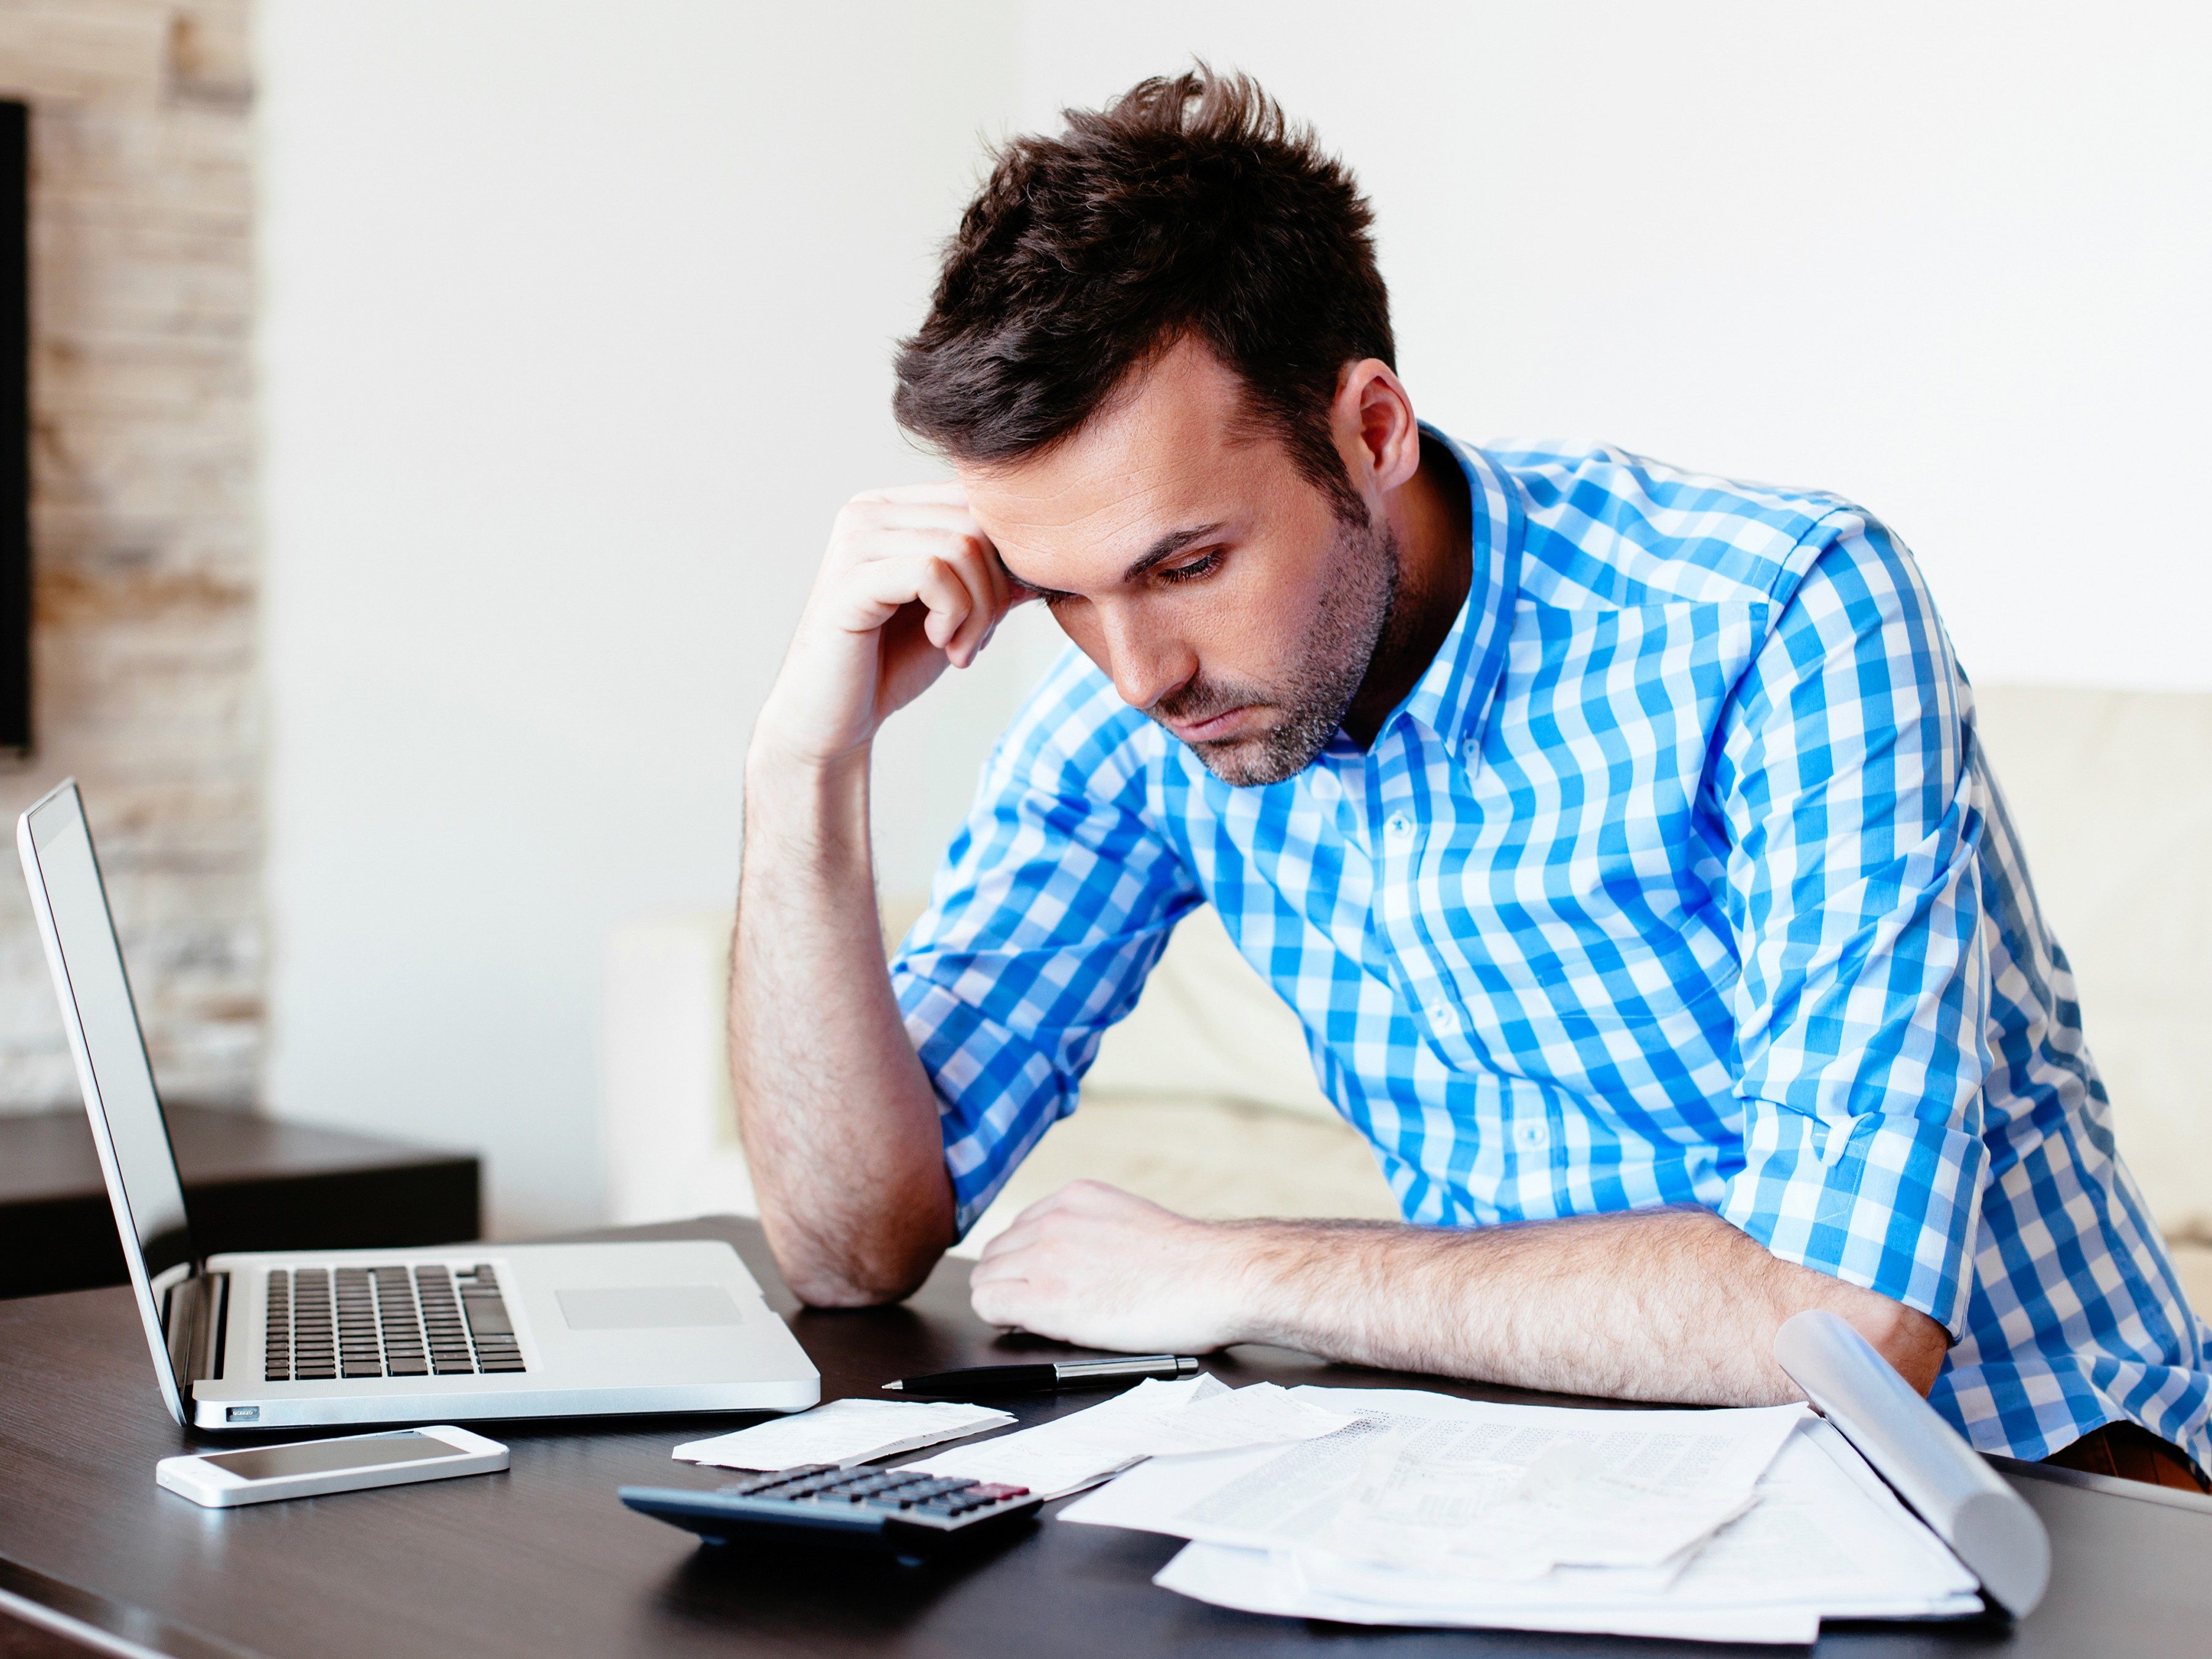 4 Tips for Filing Before the Tax Deadline